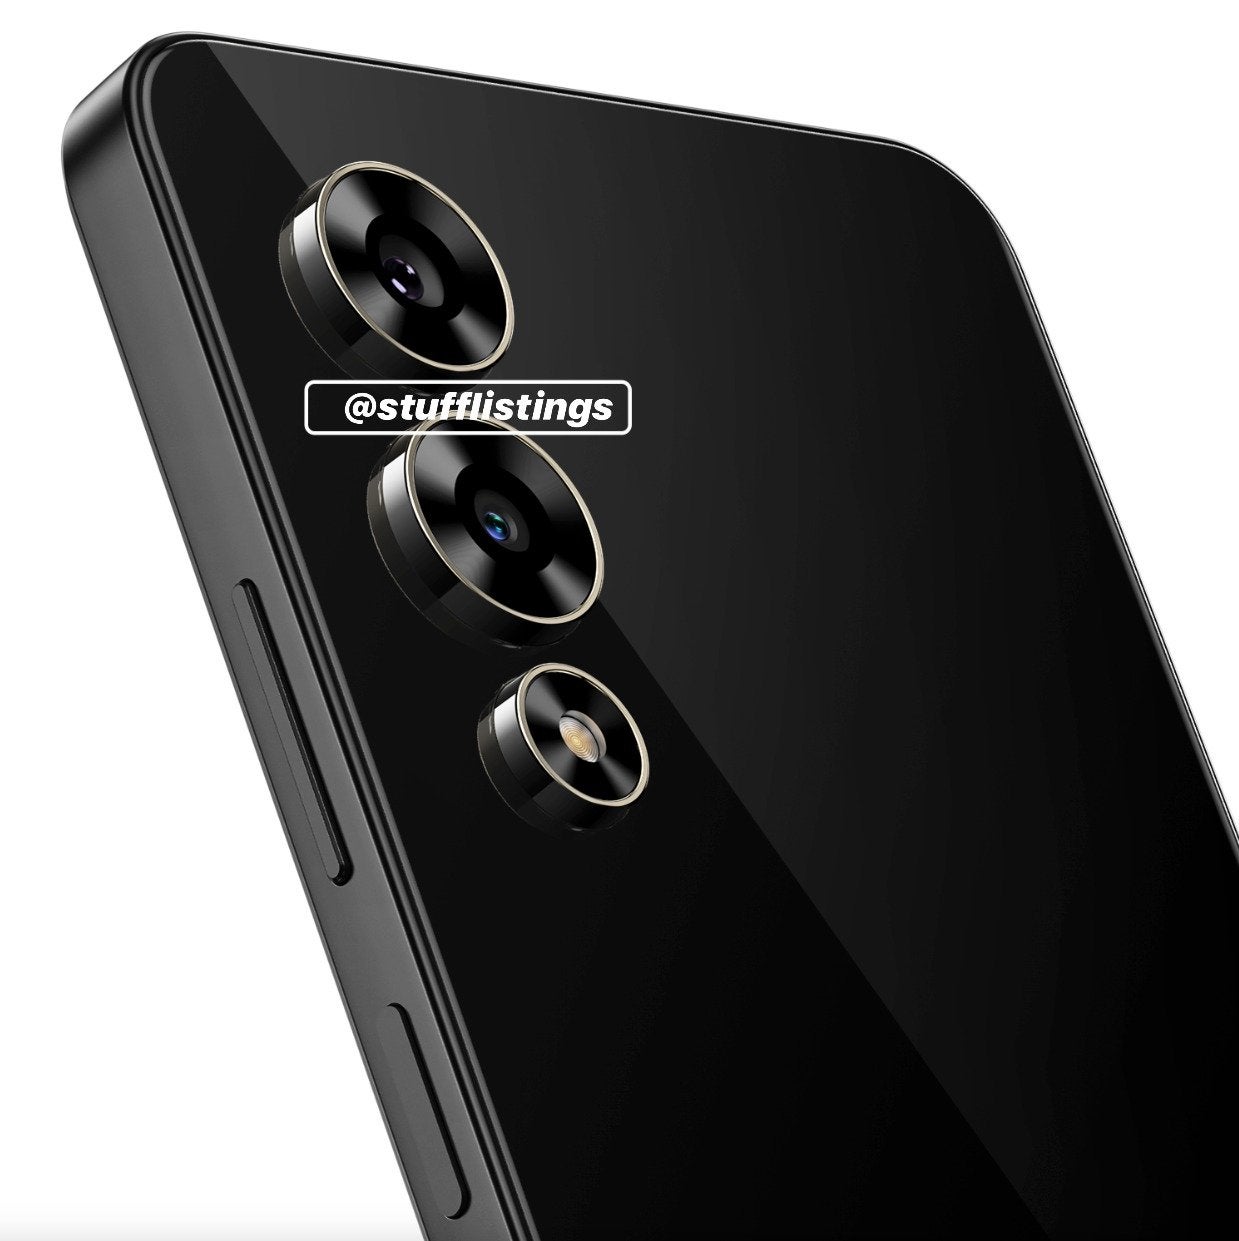 Lava Storm 5G - First high-res render of Lava Storm 5G leaks ahead of launch